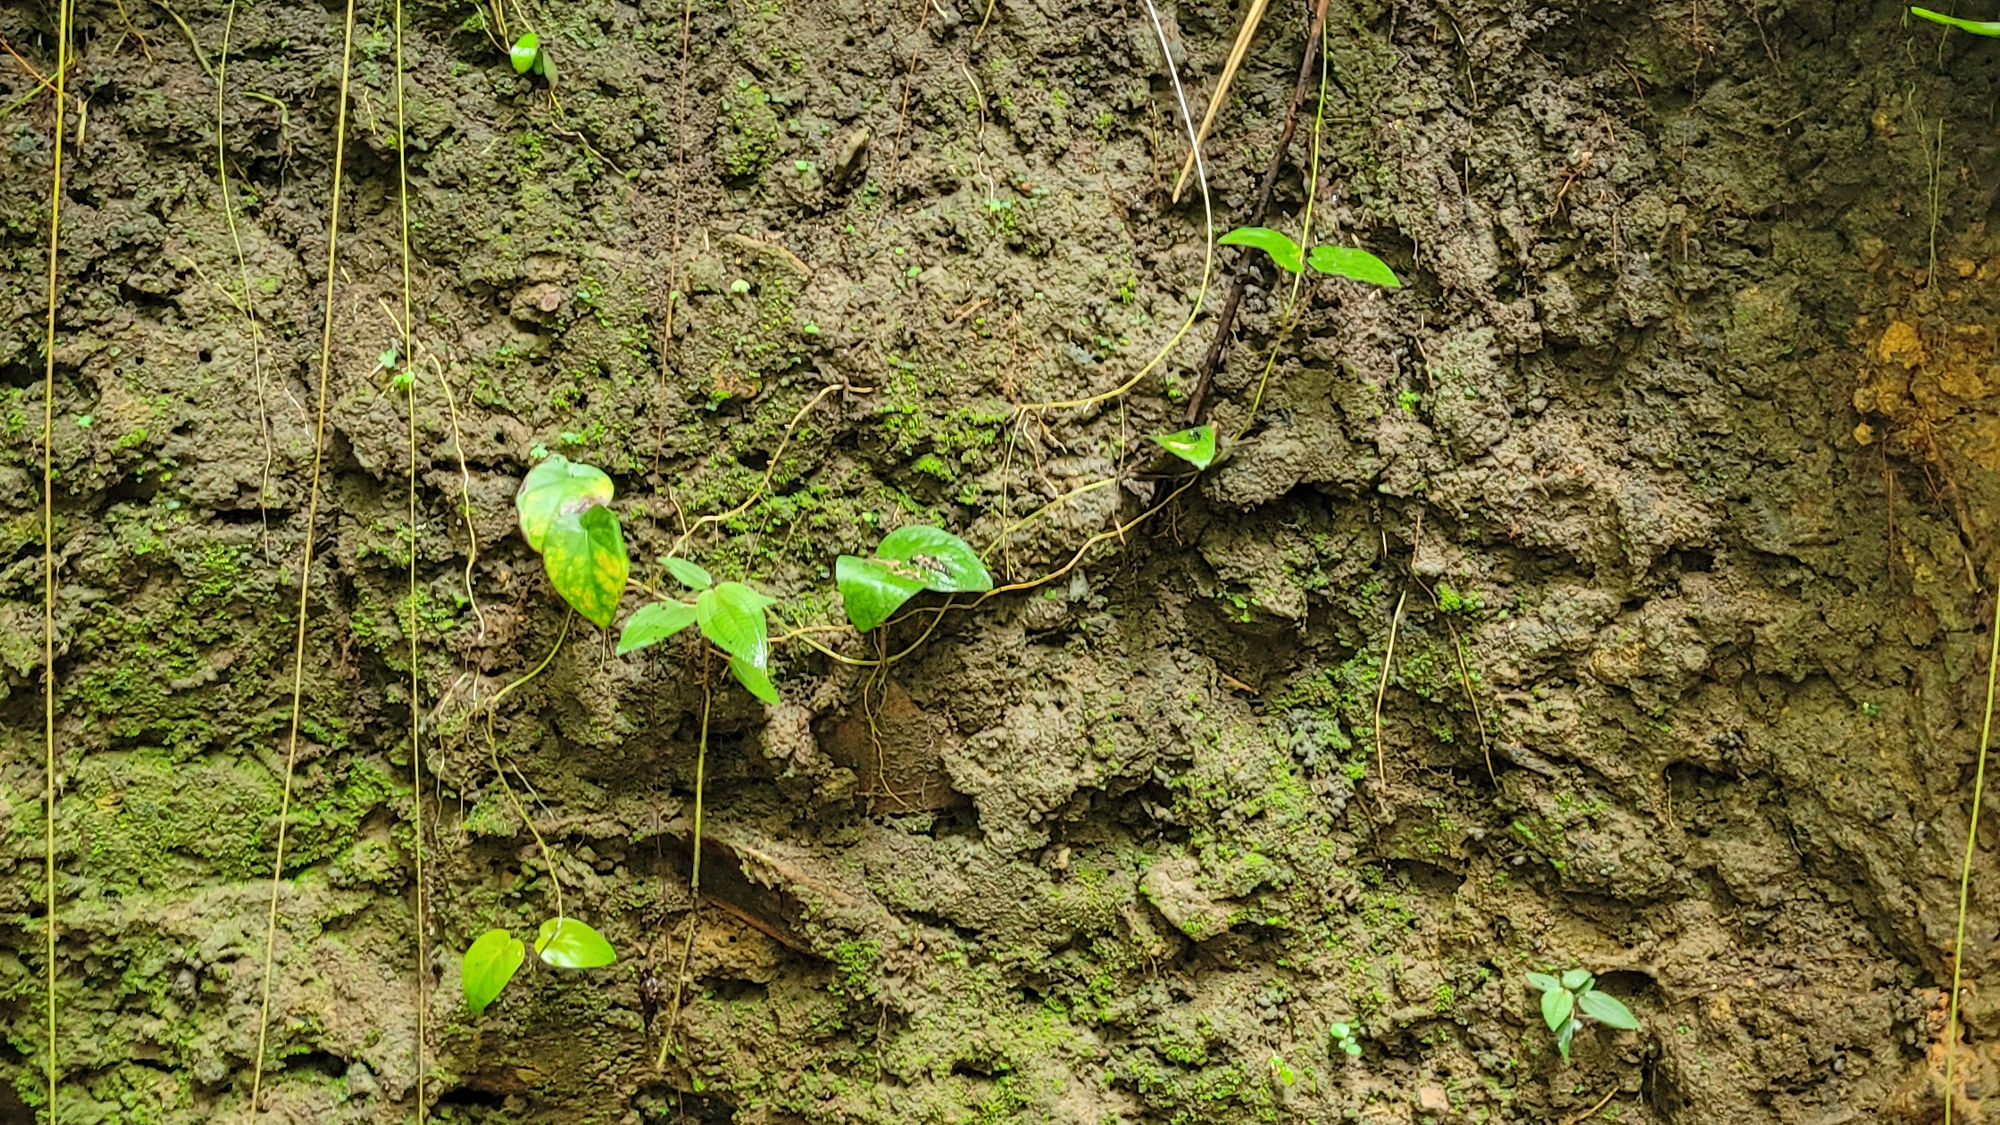 Amazonian dark earth (ADE) is a nutrient rich dark soil that could play a role in reforestation.